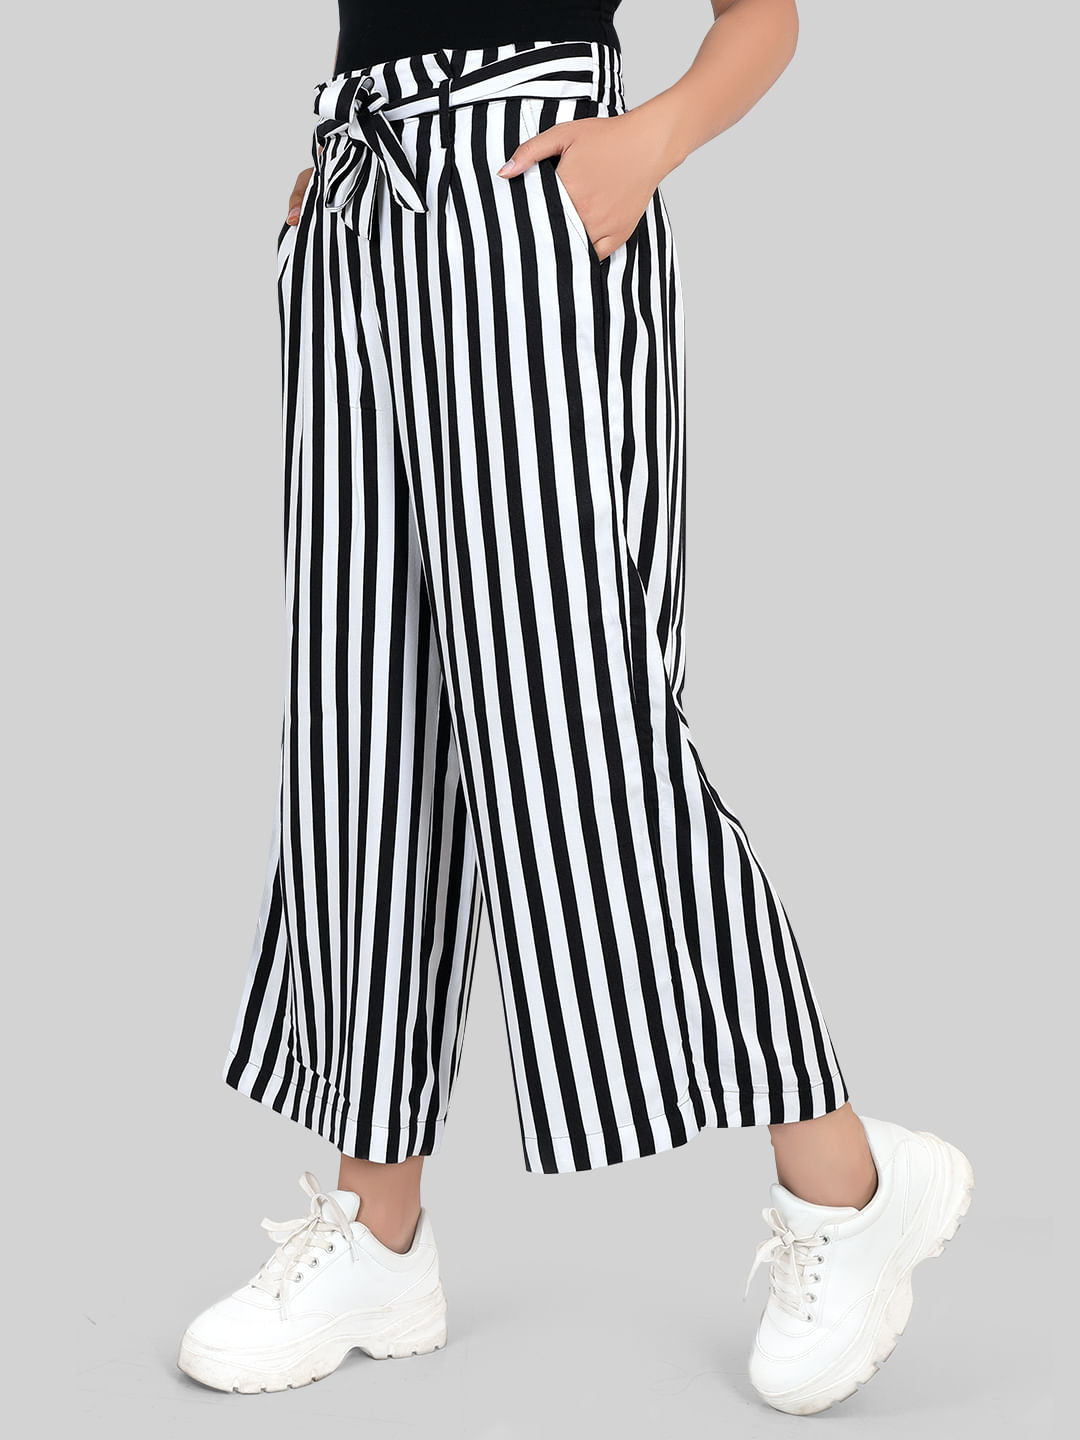 Buy Womens Striped Pant